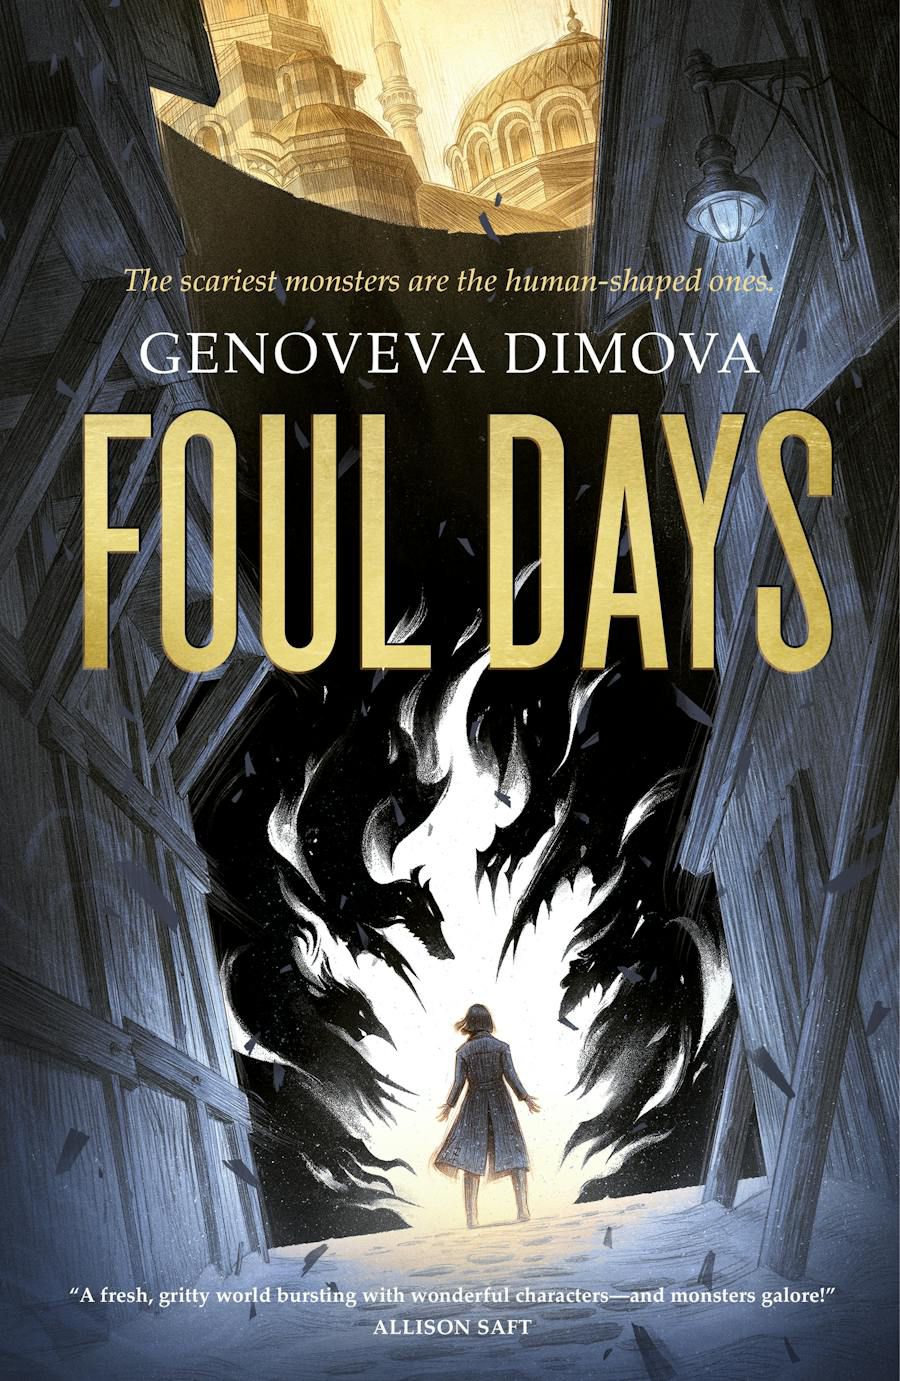 A figure is surrounded by what looks like demon spirits in the cover for Genoveva Dimova’s Foul Days